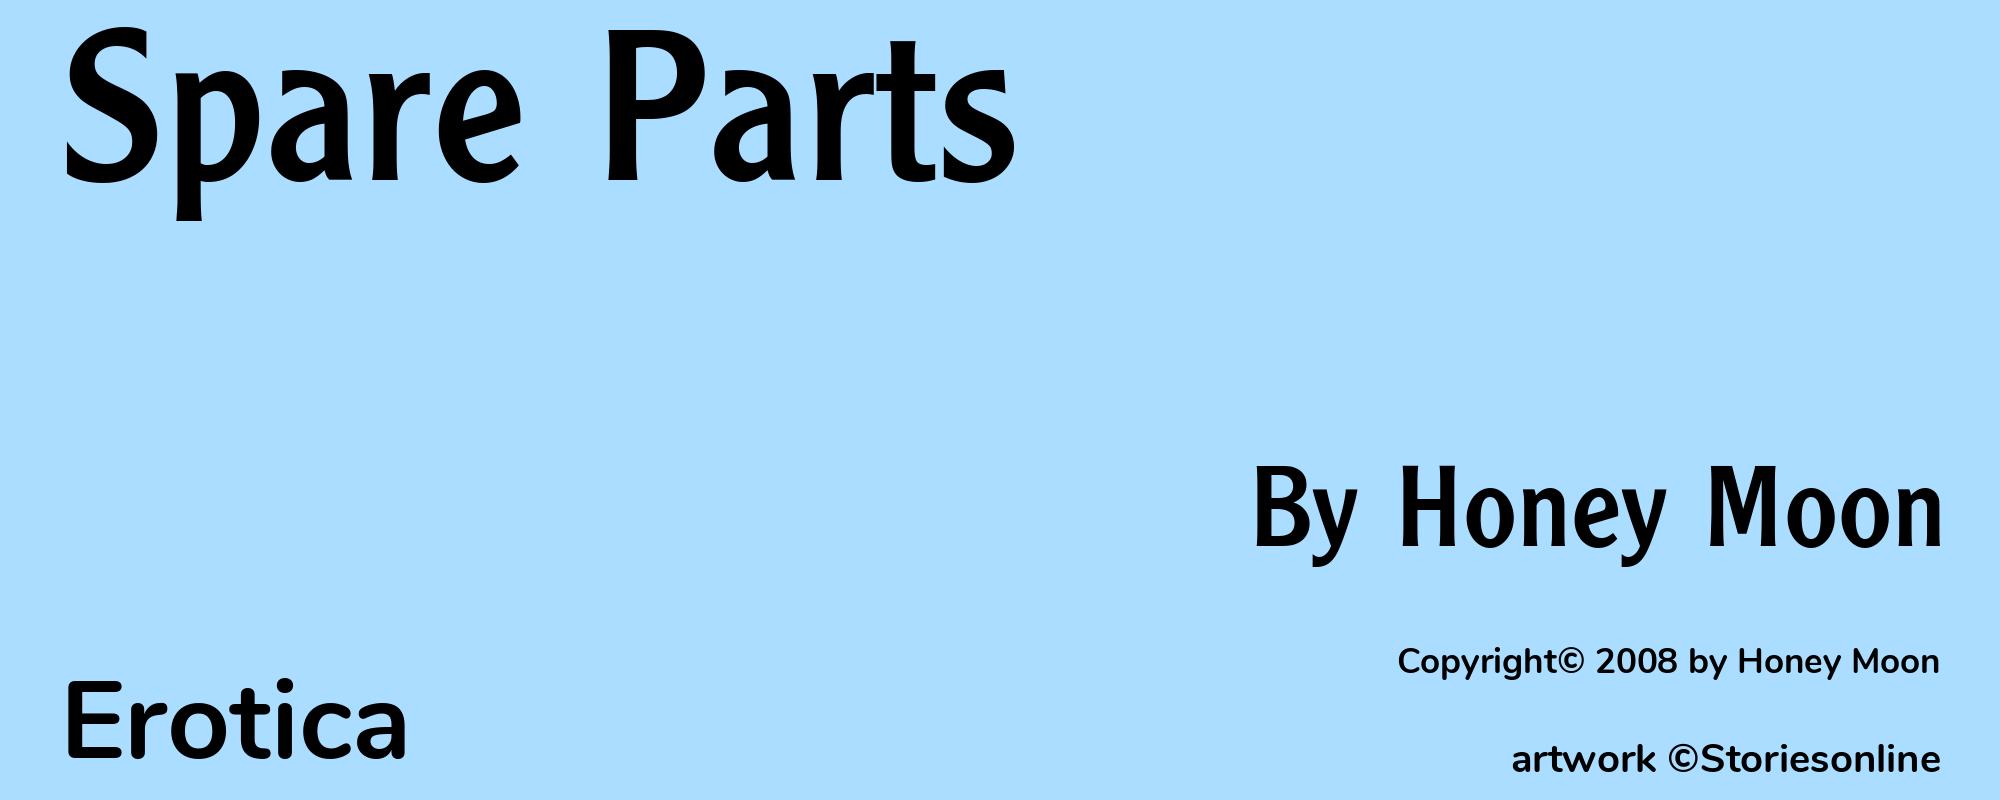 Spare Parts - Cover